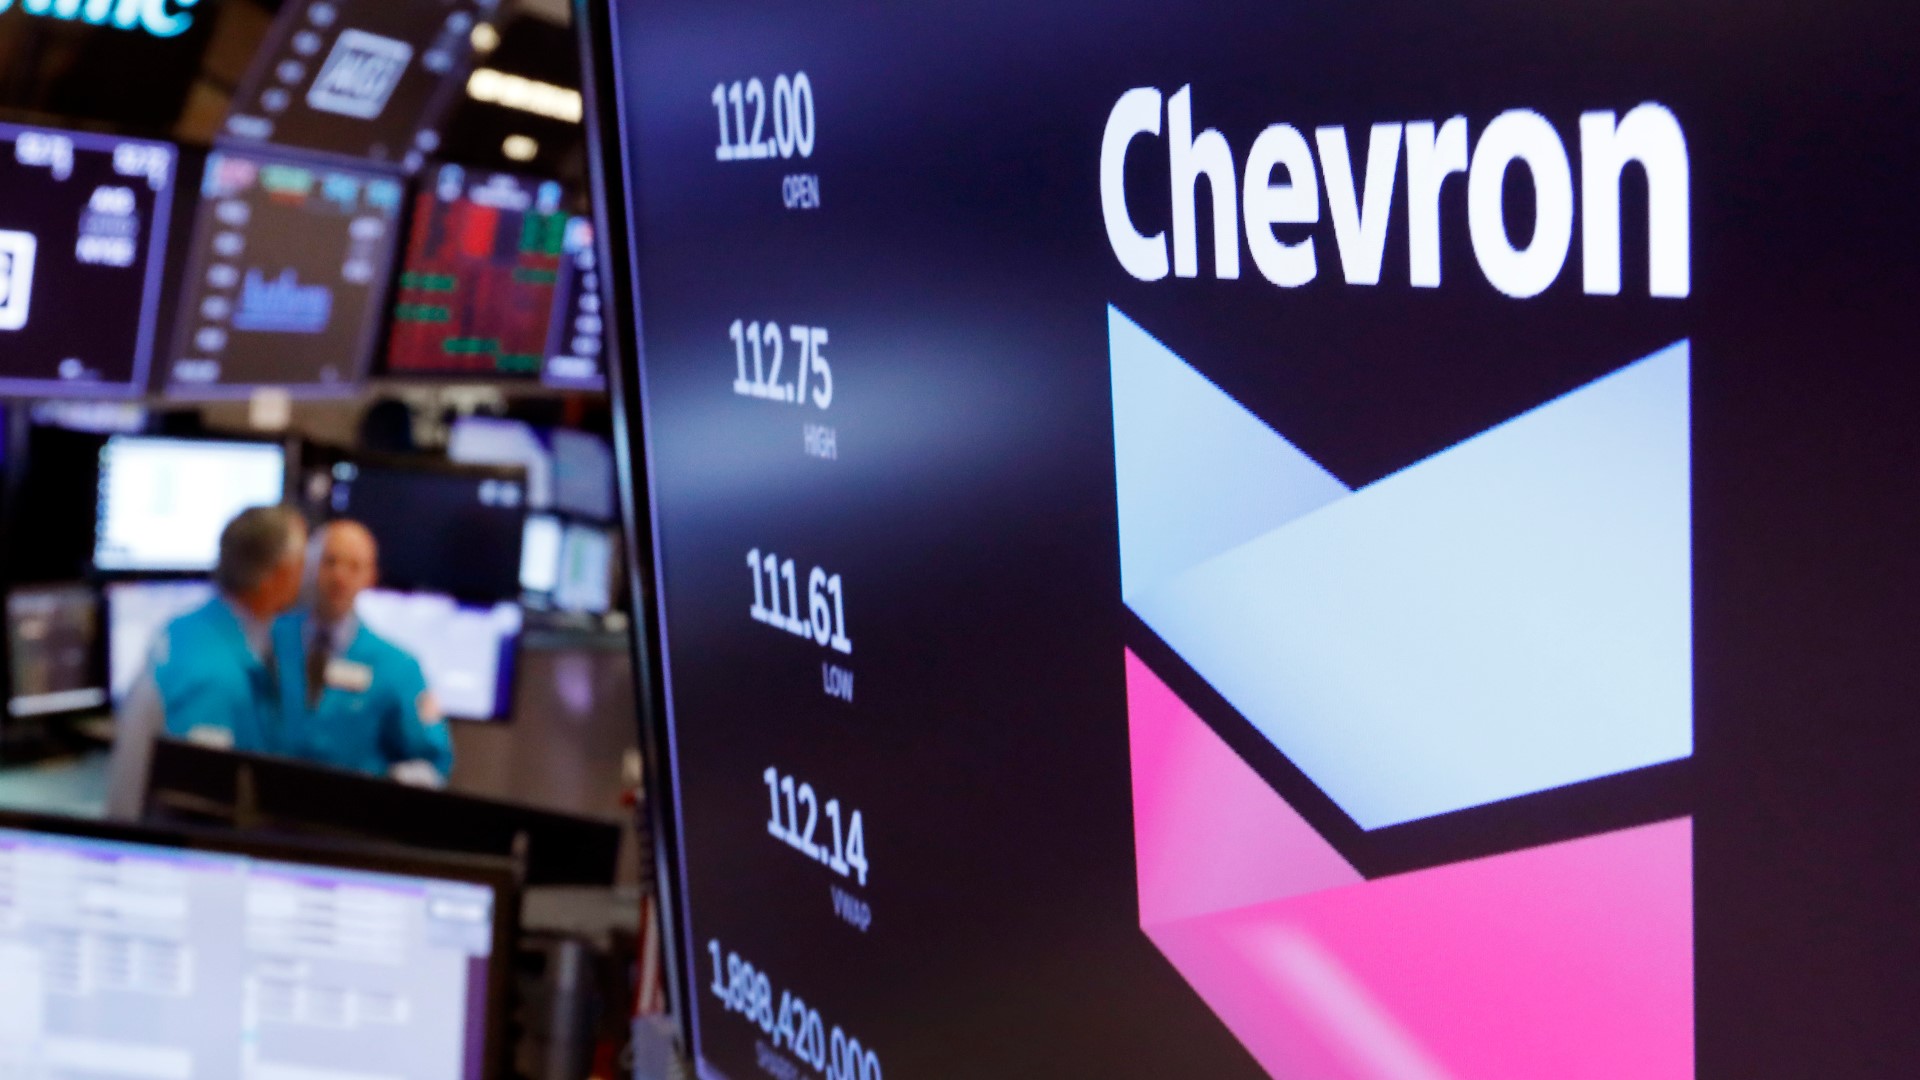 Chevron will eliminate 700 jobs from its downtown Houston offices, according to the Houston Business Journal.